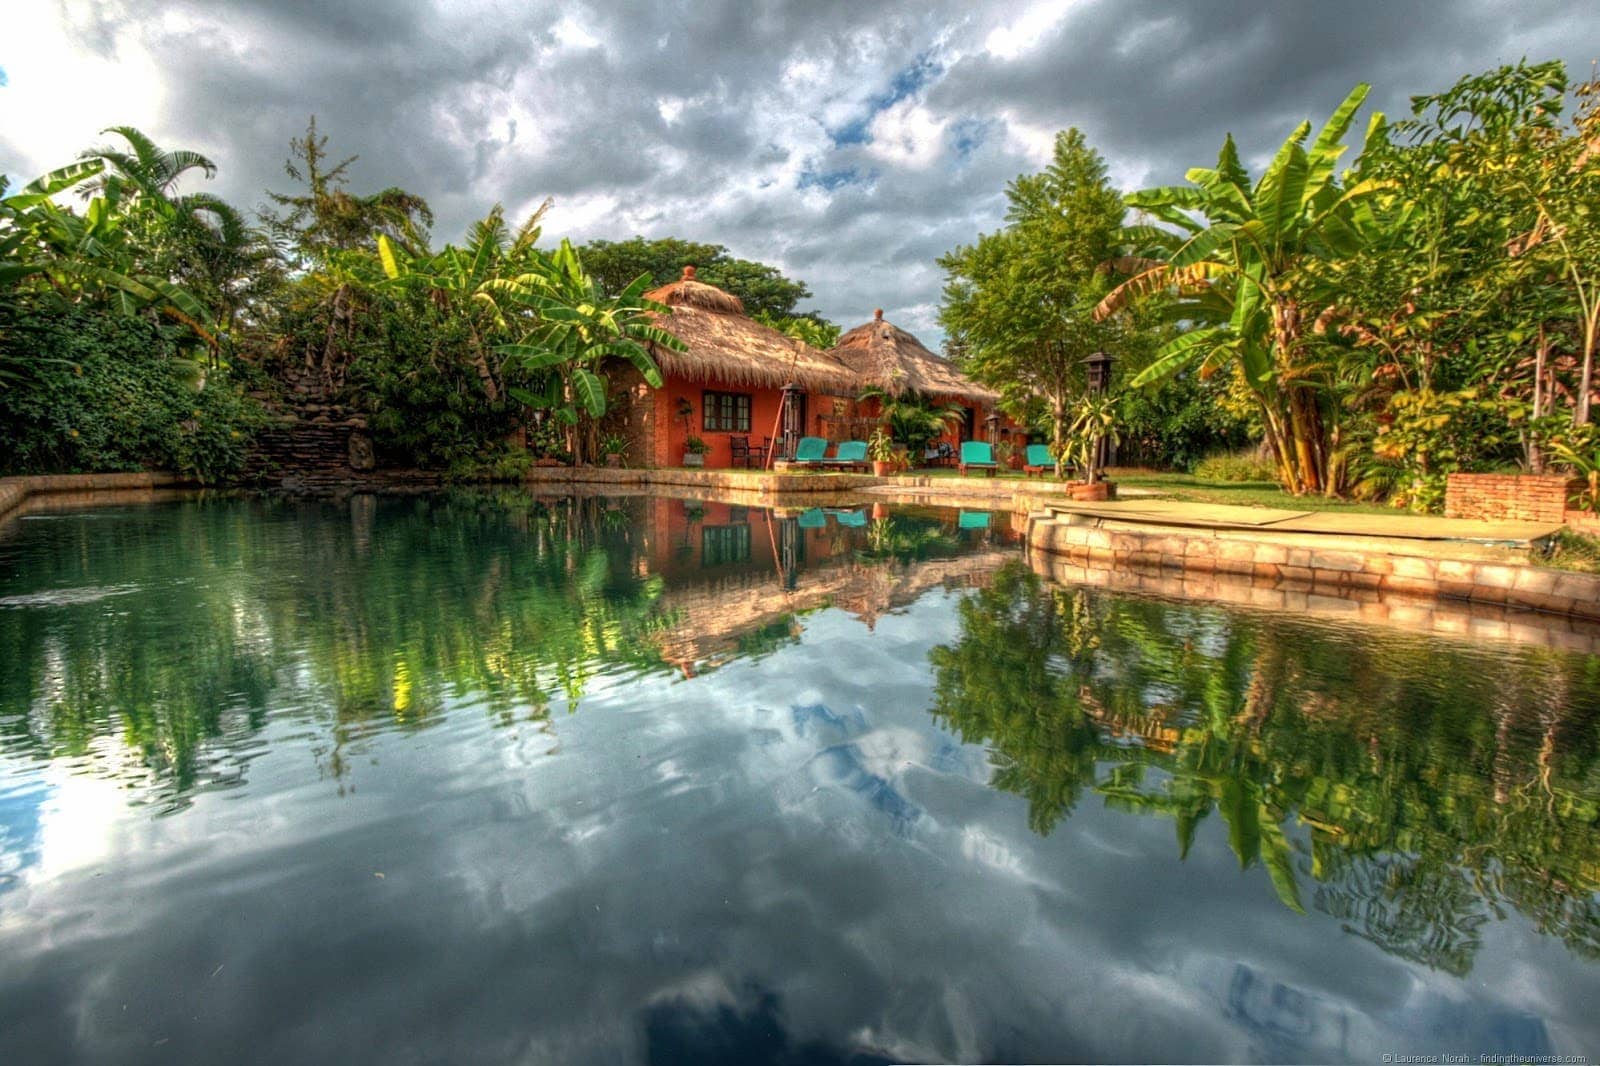 Reflection of chalet pool banana trees hostel by Laurence of findingtheuniverse.com